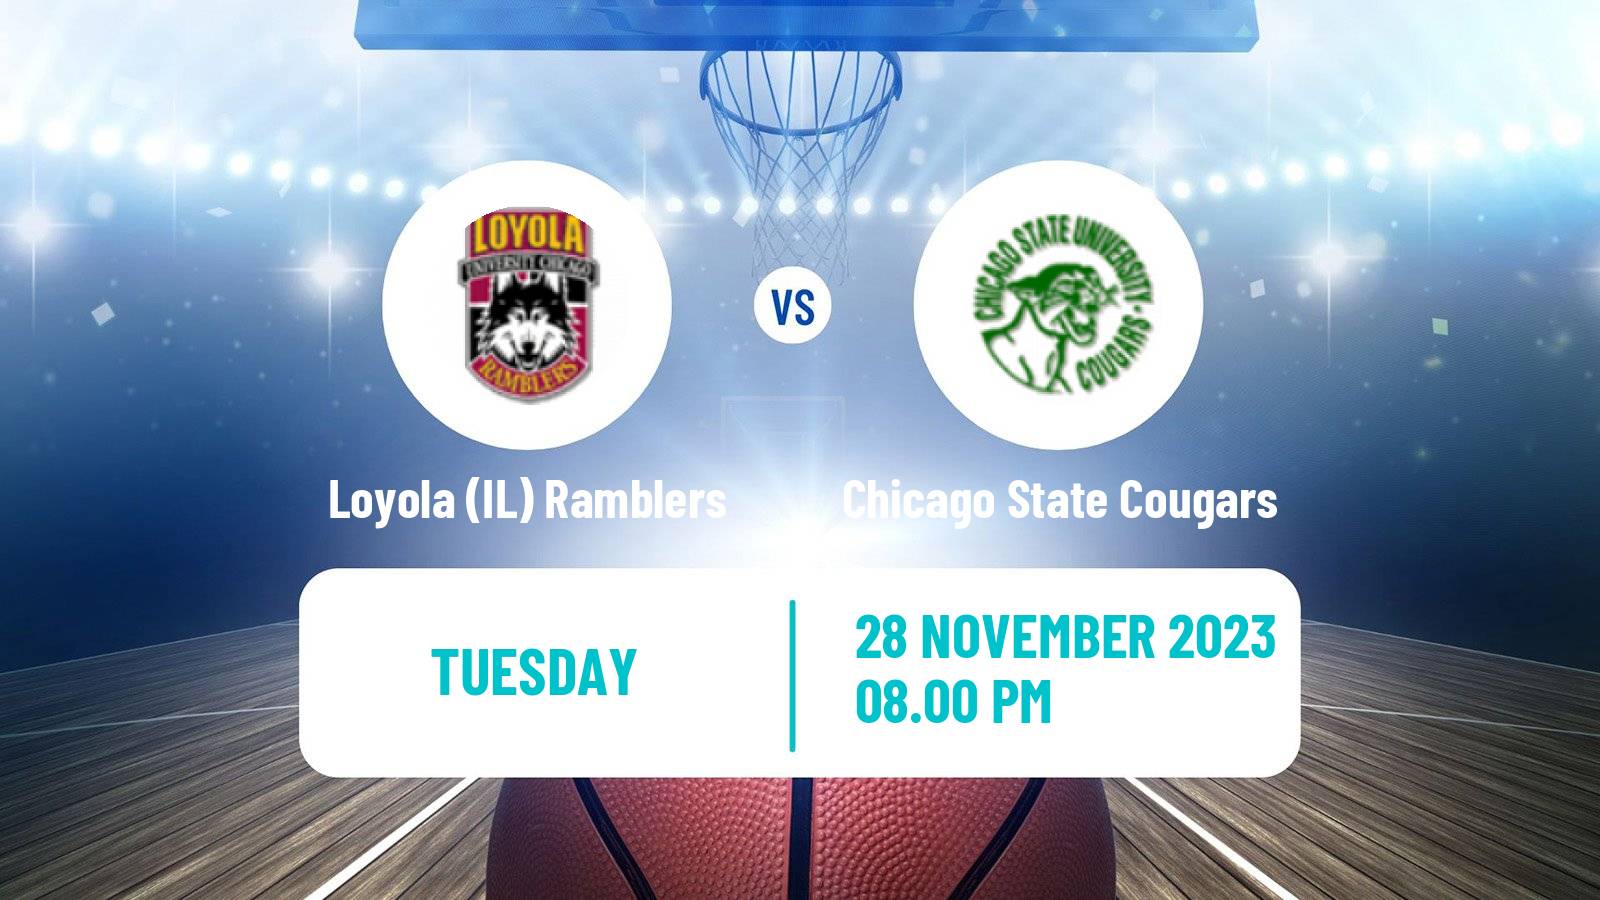 Basketball NCAA College Basketball Loyola (IL) Ramblers - Chicago State Cougars